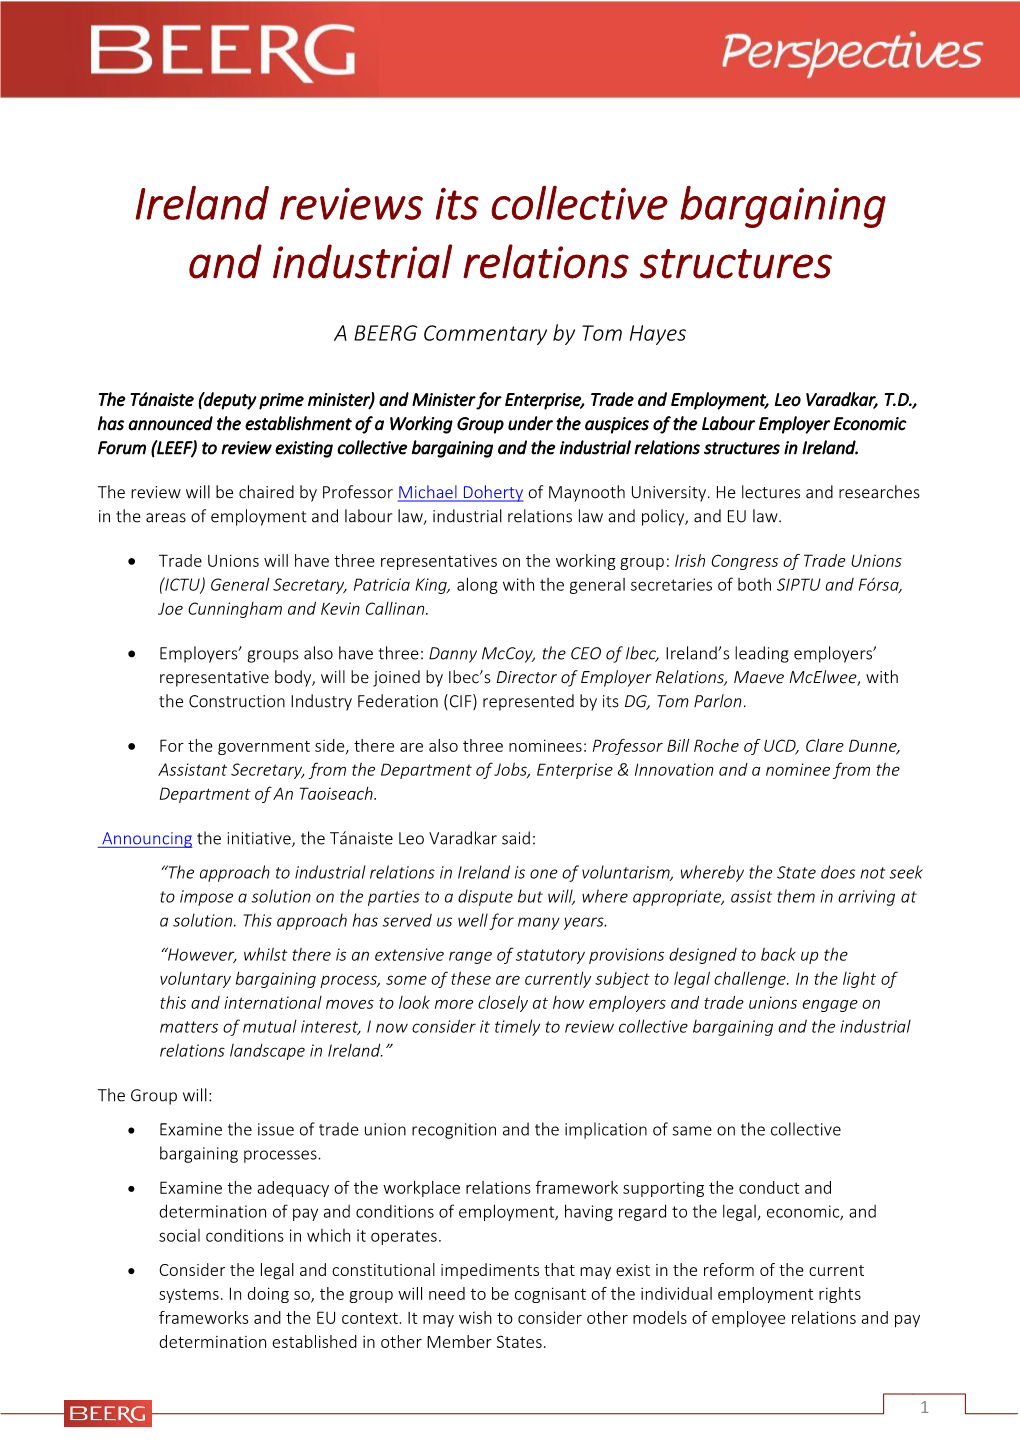 Ireland Reviews Its Collective Bargaining and Industrial Relations Structures